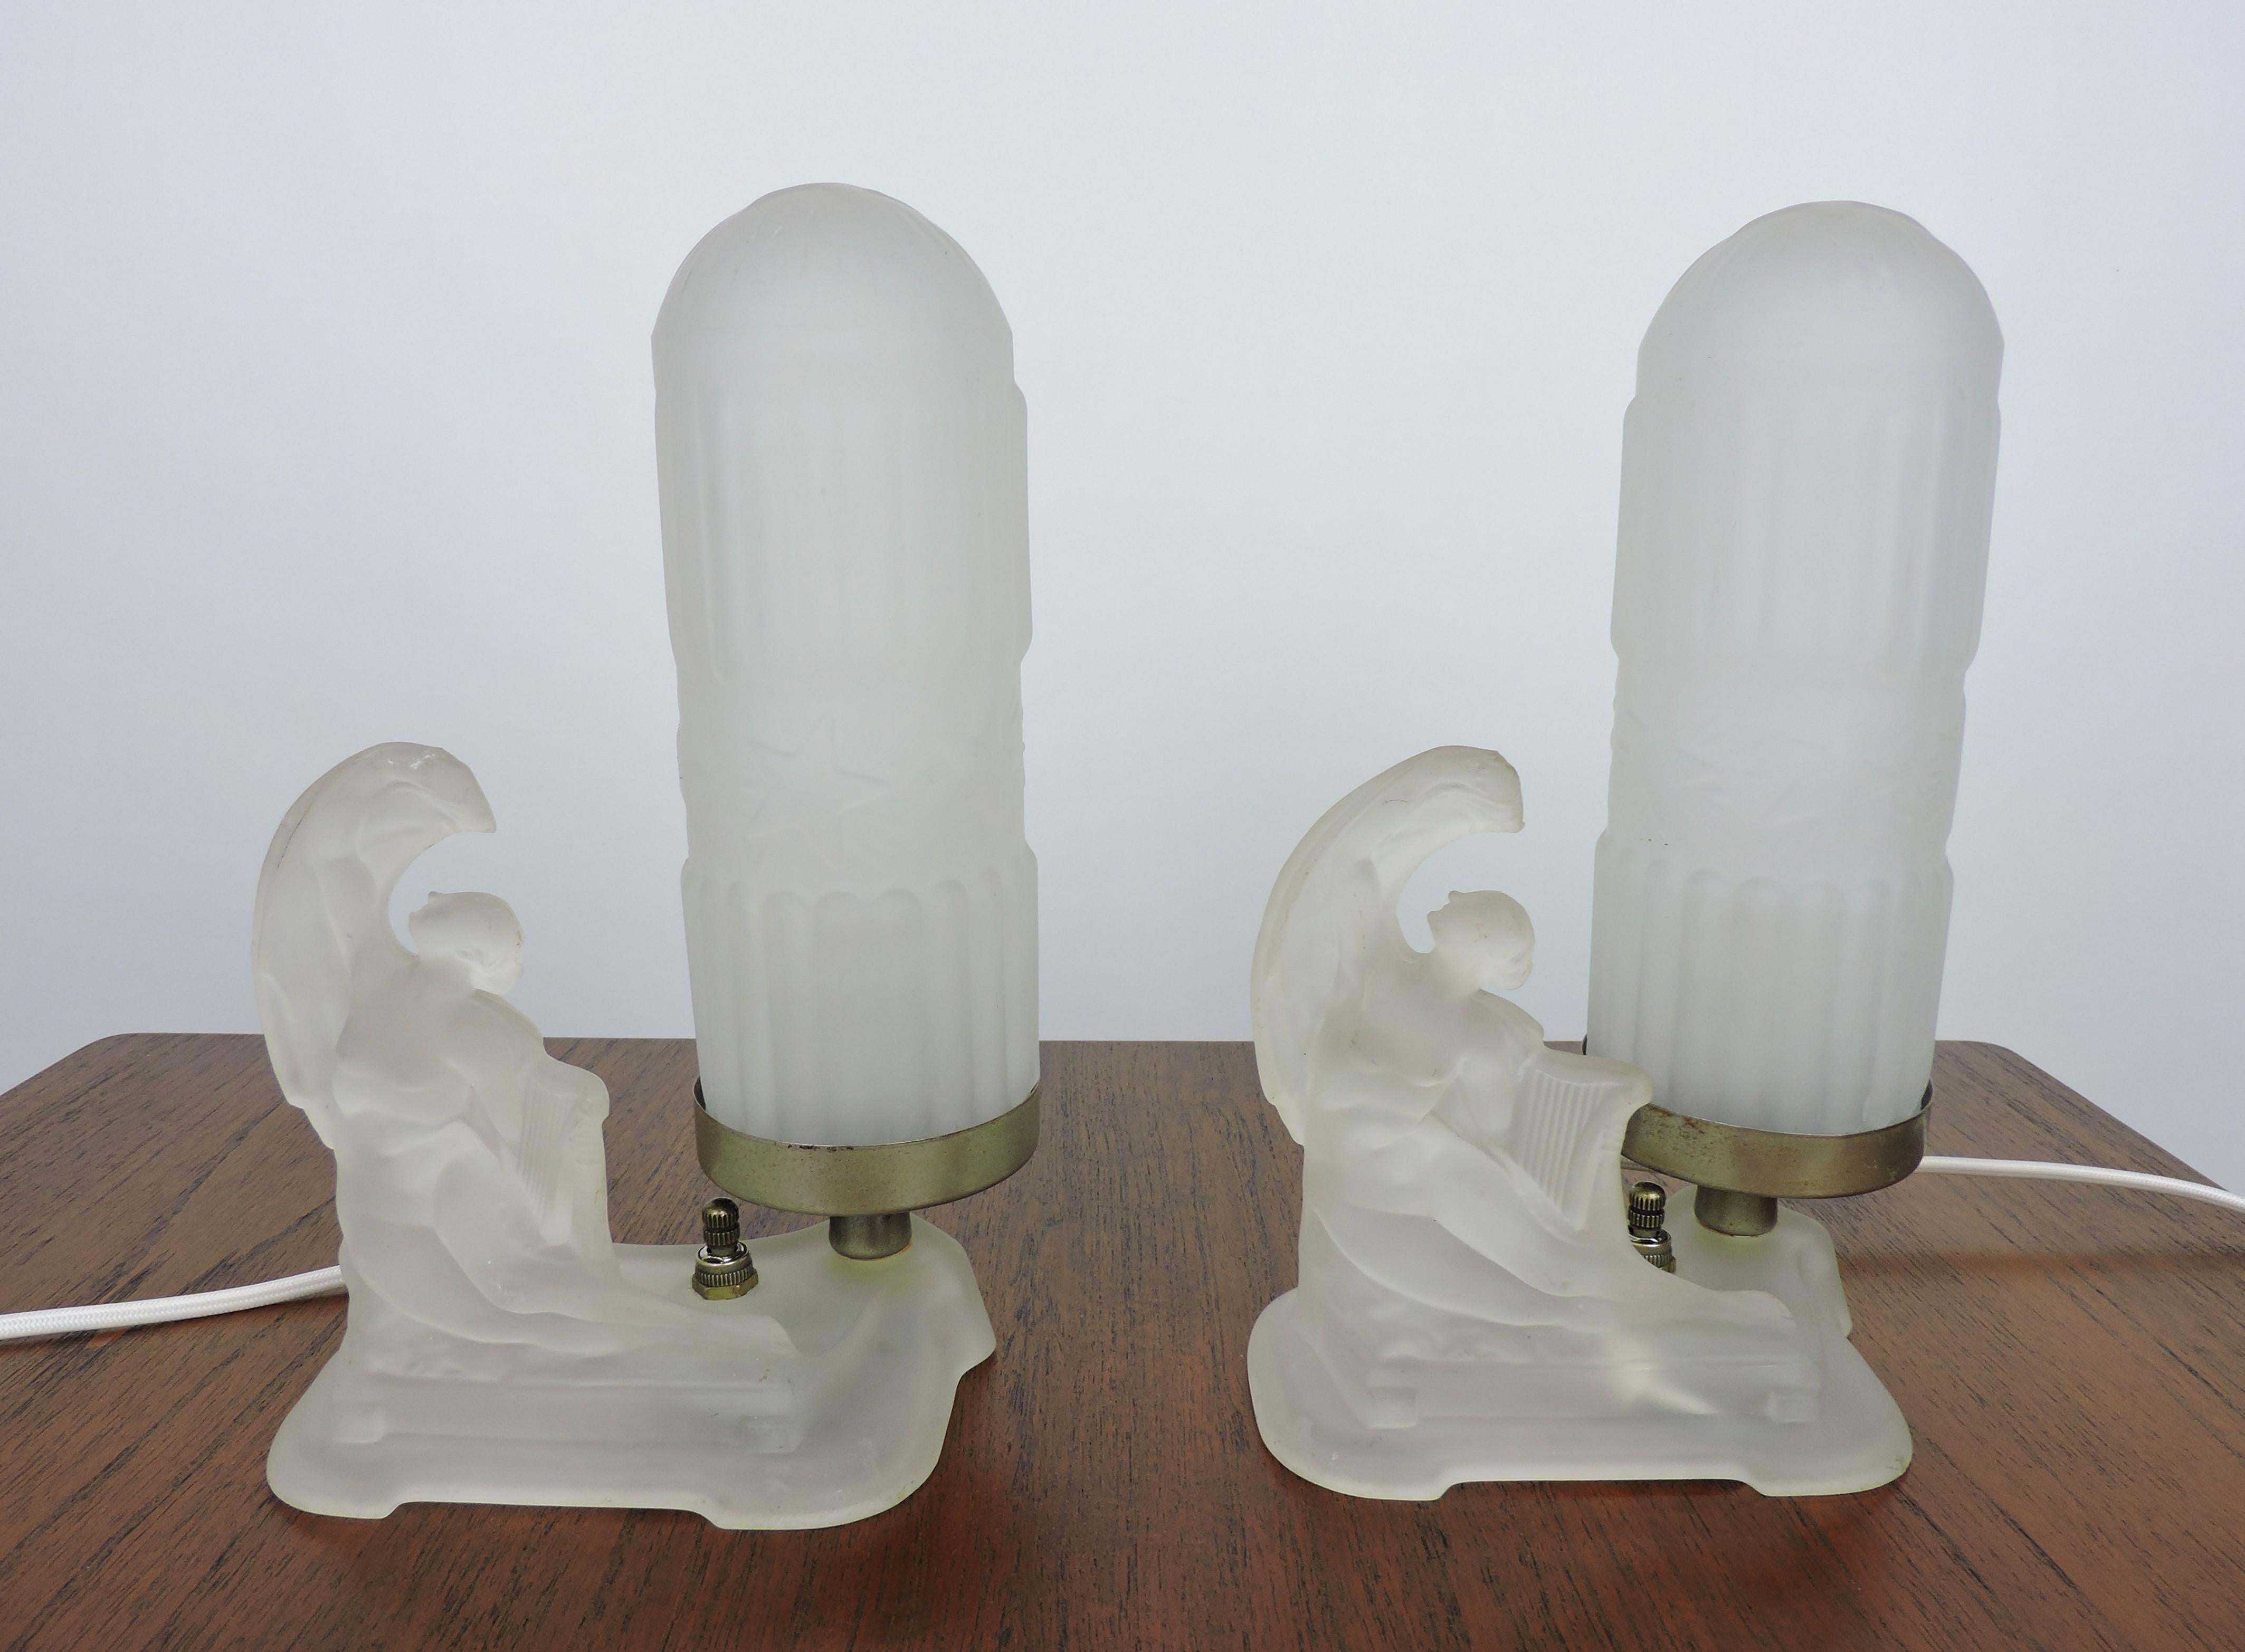 Beautiful pair of Art Deco boudoir table lamps with frosted glass nudes holding lyres attributed to McKee Glass Company of Pittsburgh. These have all new wiring with cloth covered cords. The frosted bullet shades are not original to the lamps, but